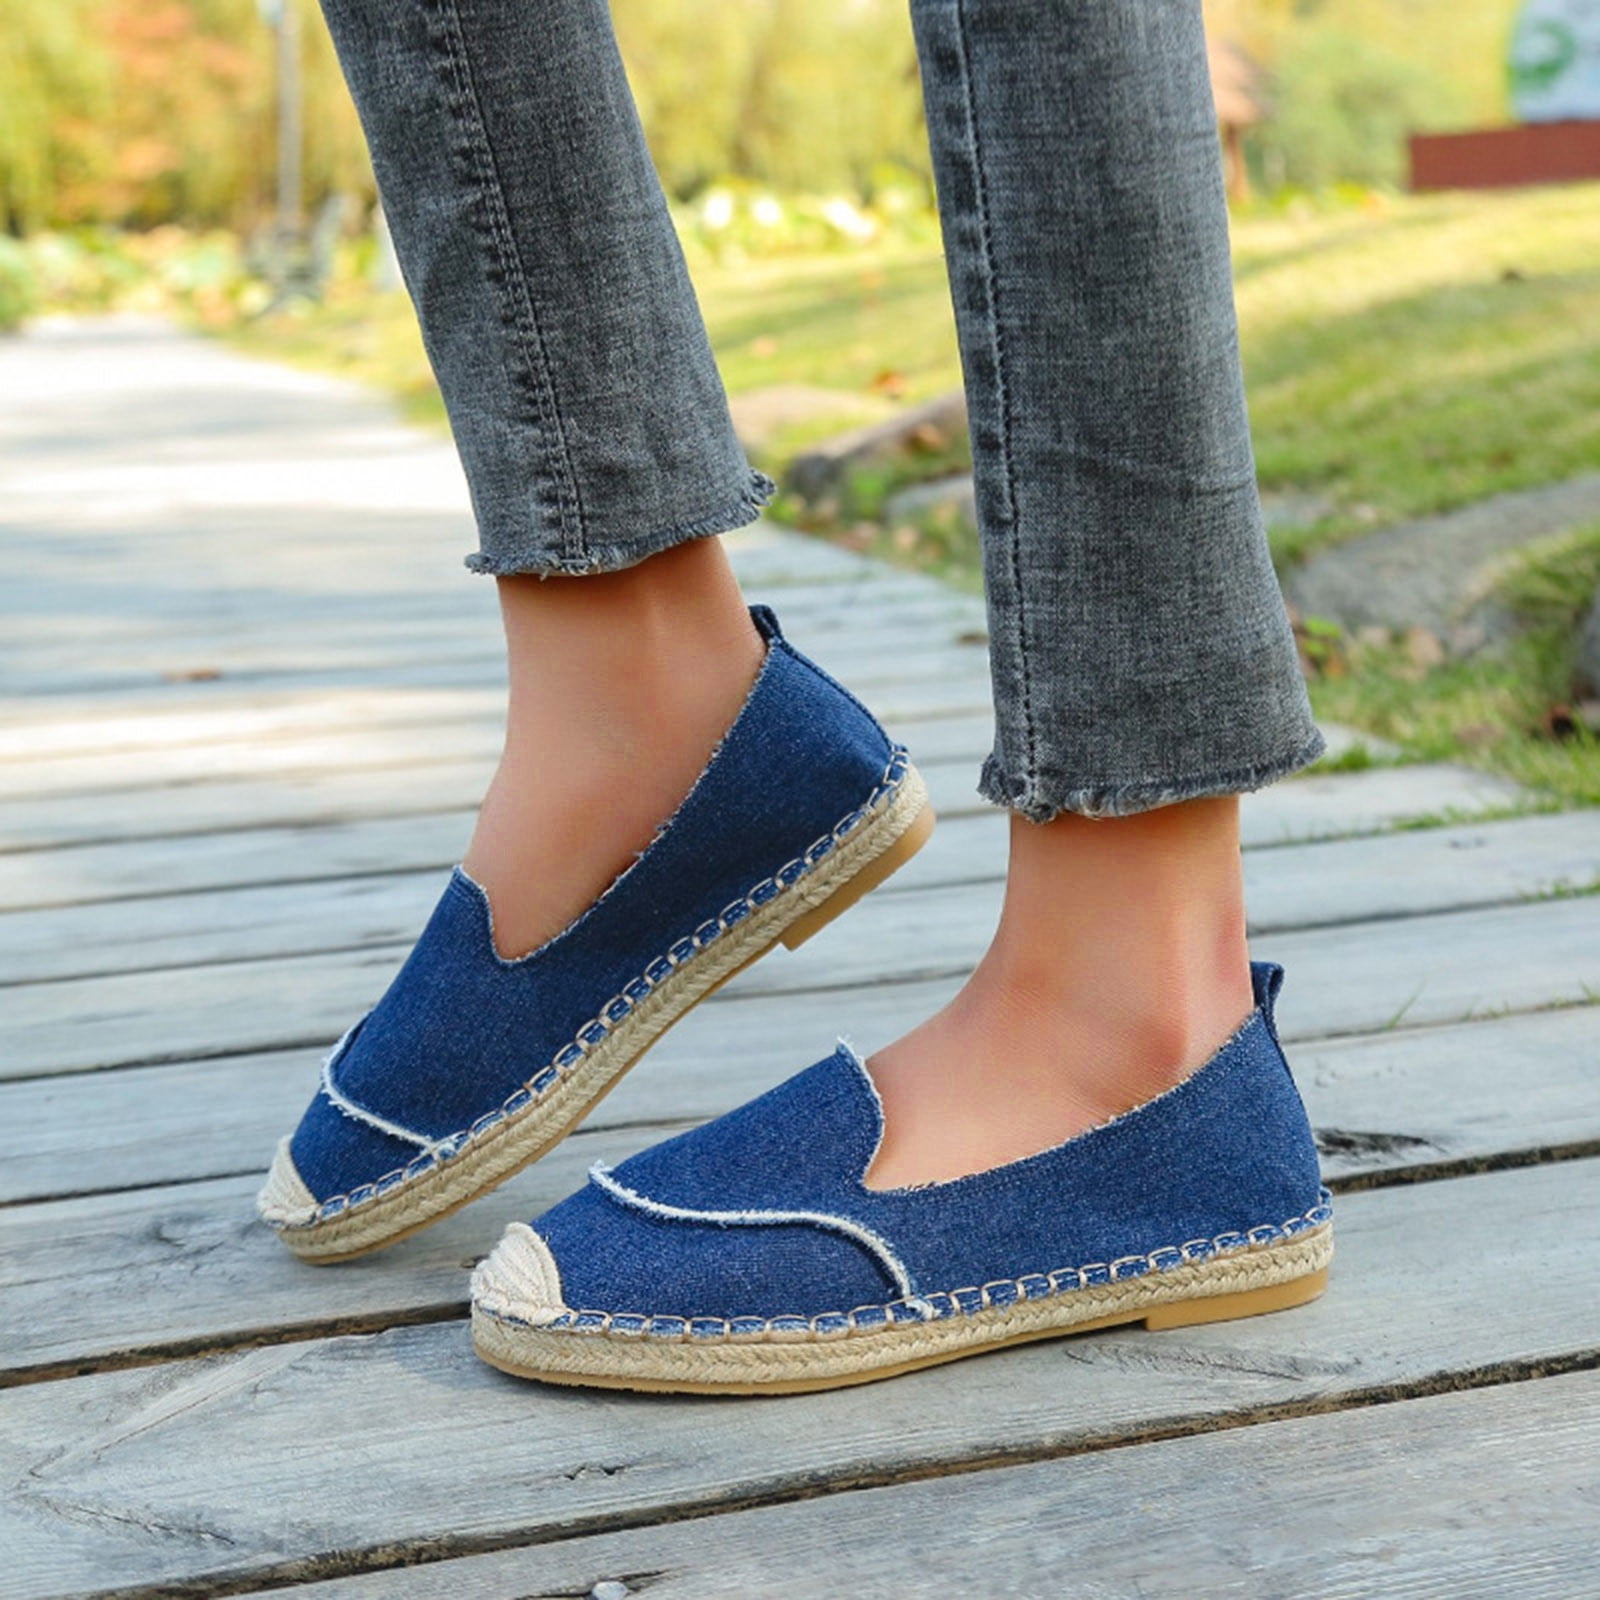 Women Espadrille Shoes Fashion Solid Color Sewing PU Slip On Low Top Round Toe Flat Single Shoes Big Size 42 Ladies Casual Platform Shoes 